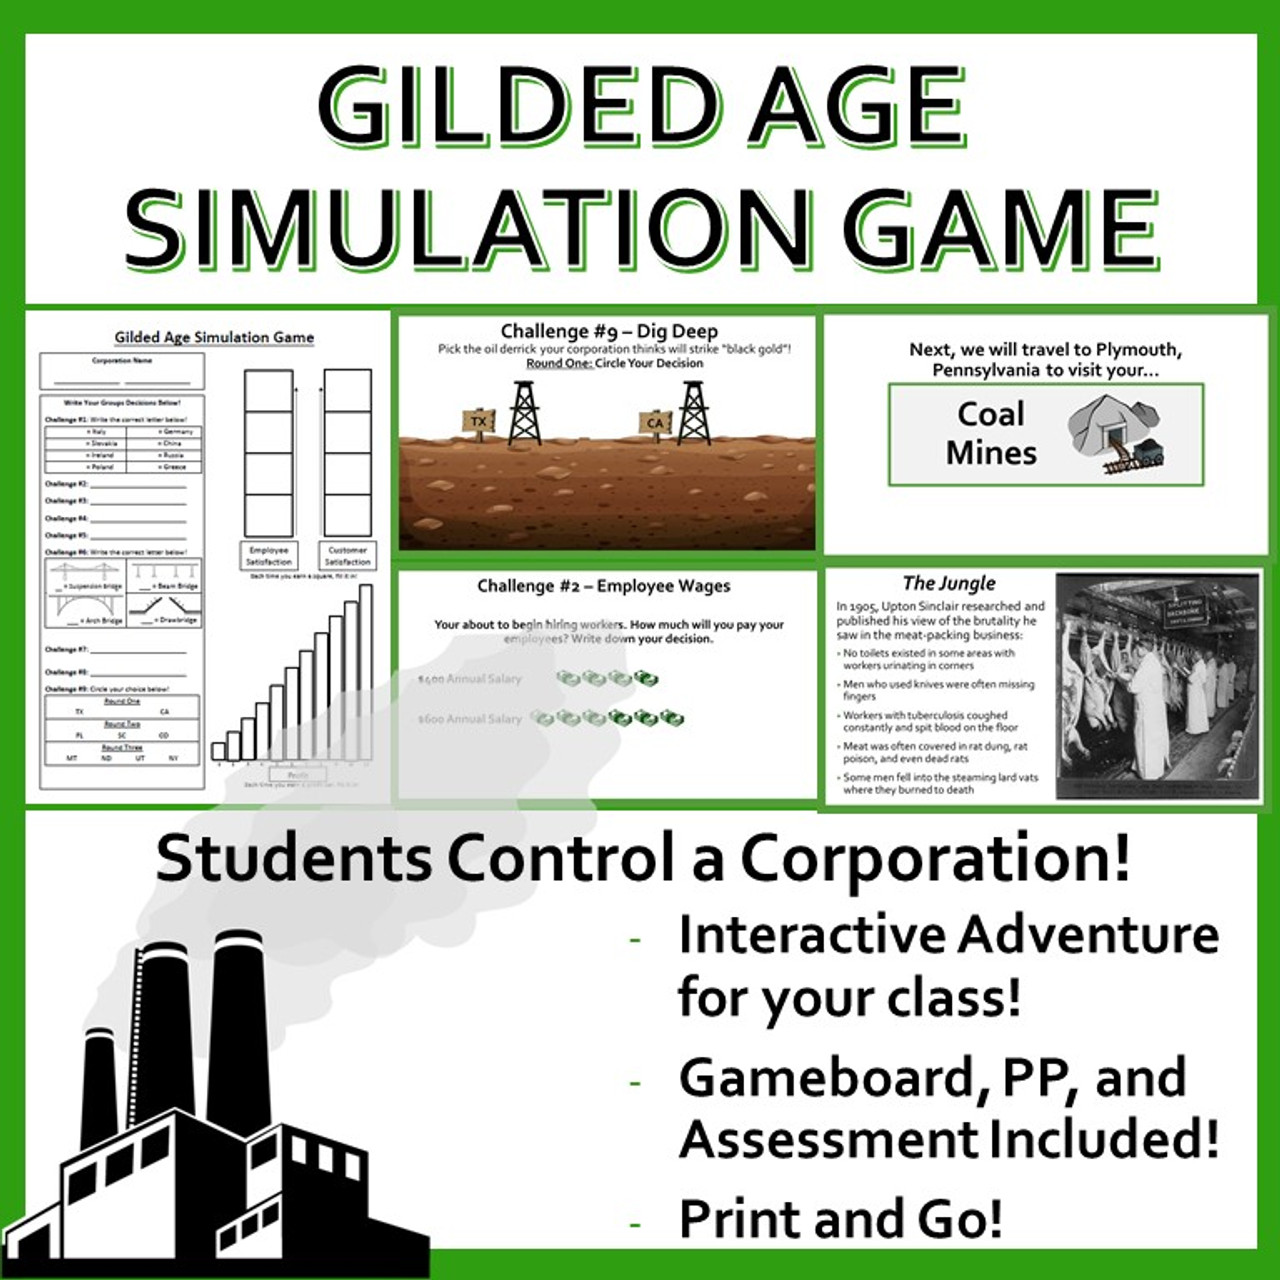 Gilded Age Simulation Game